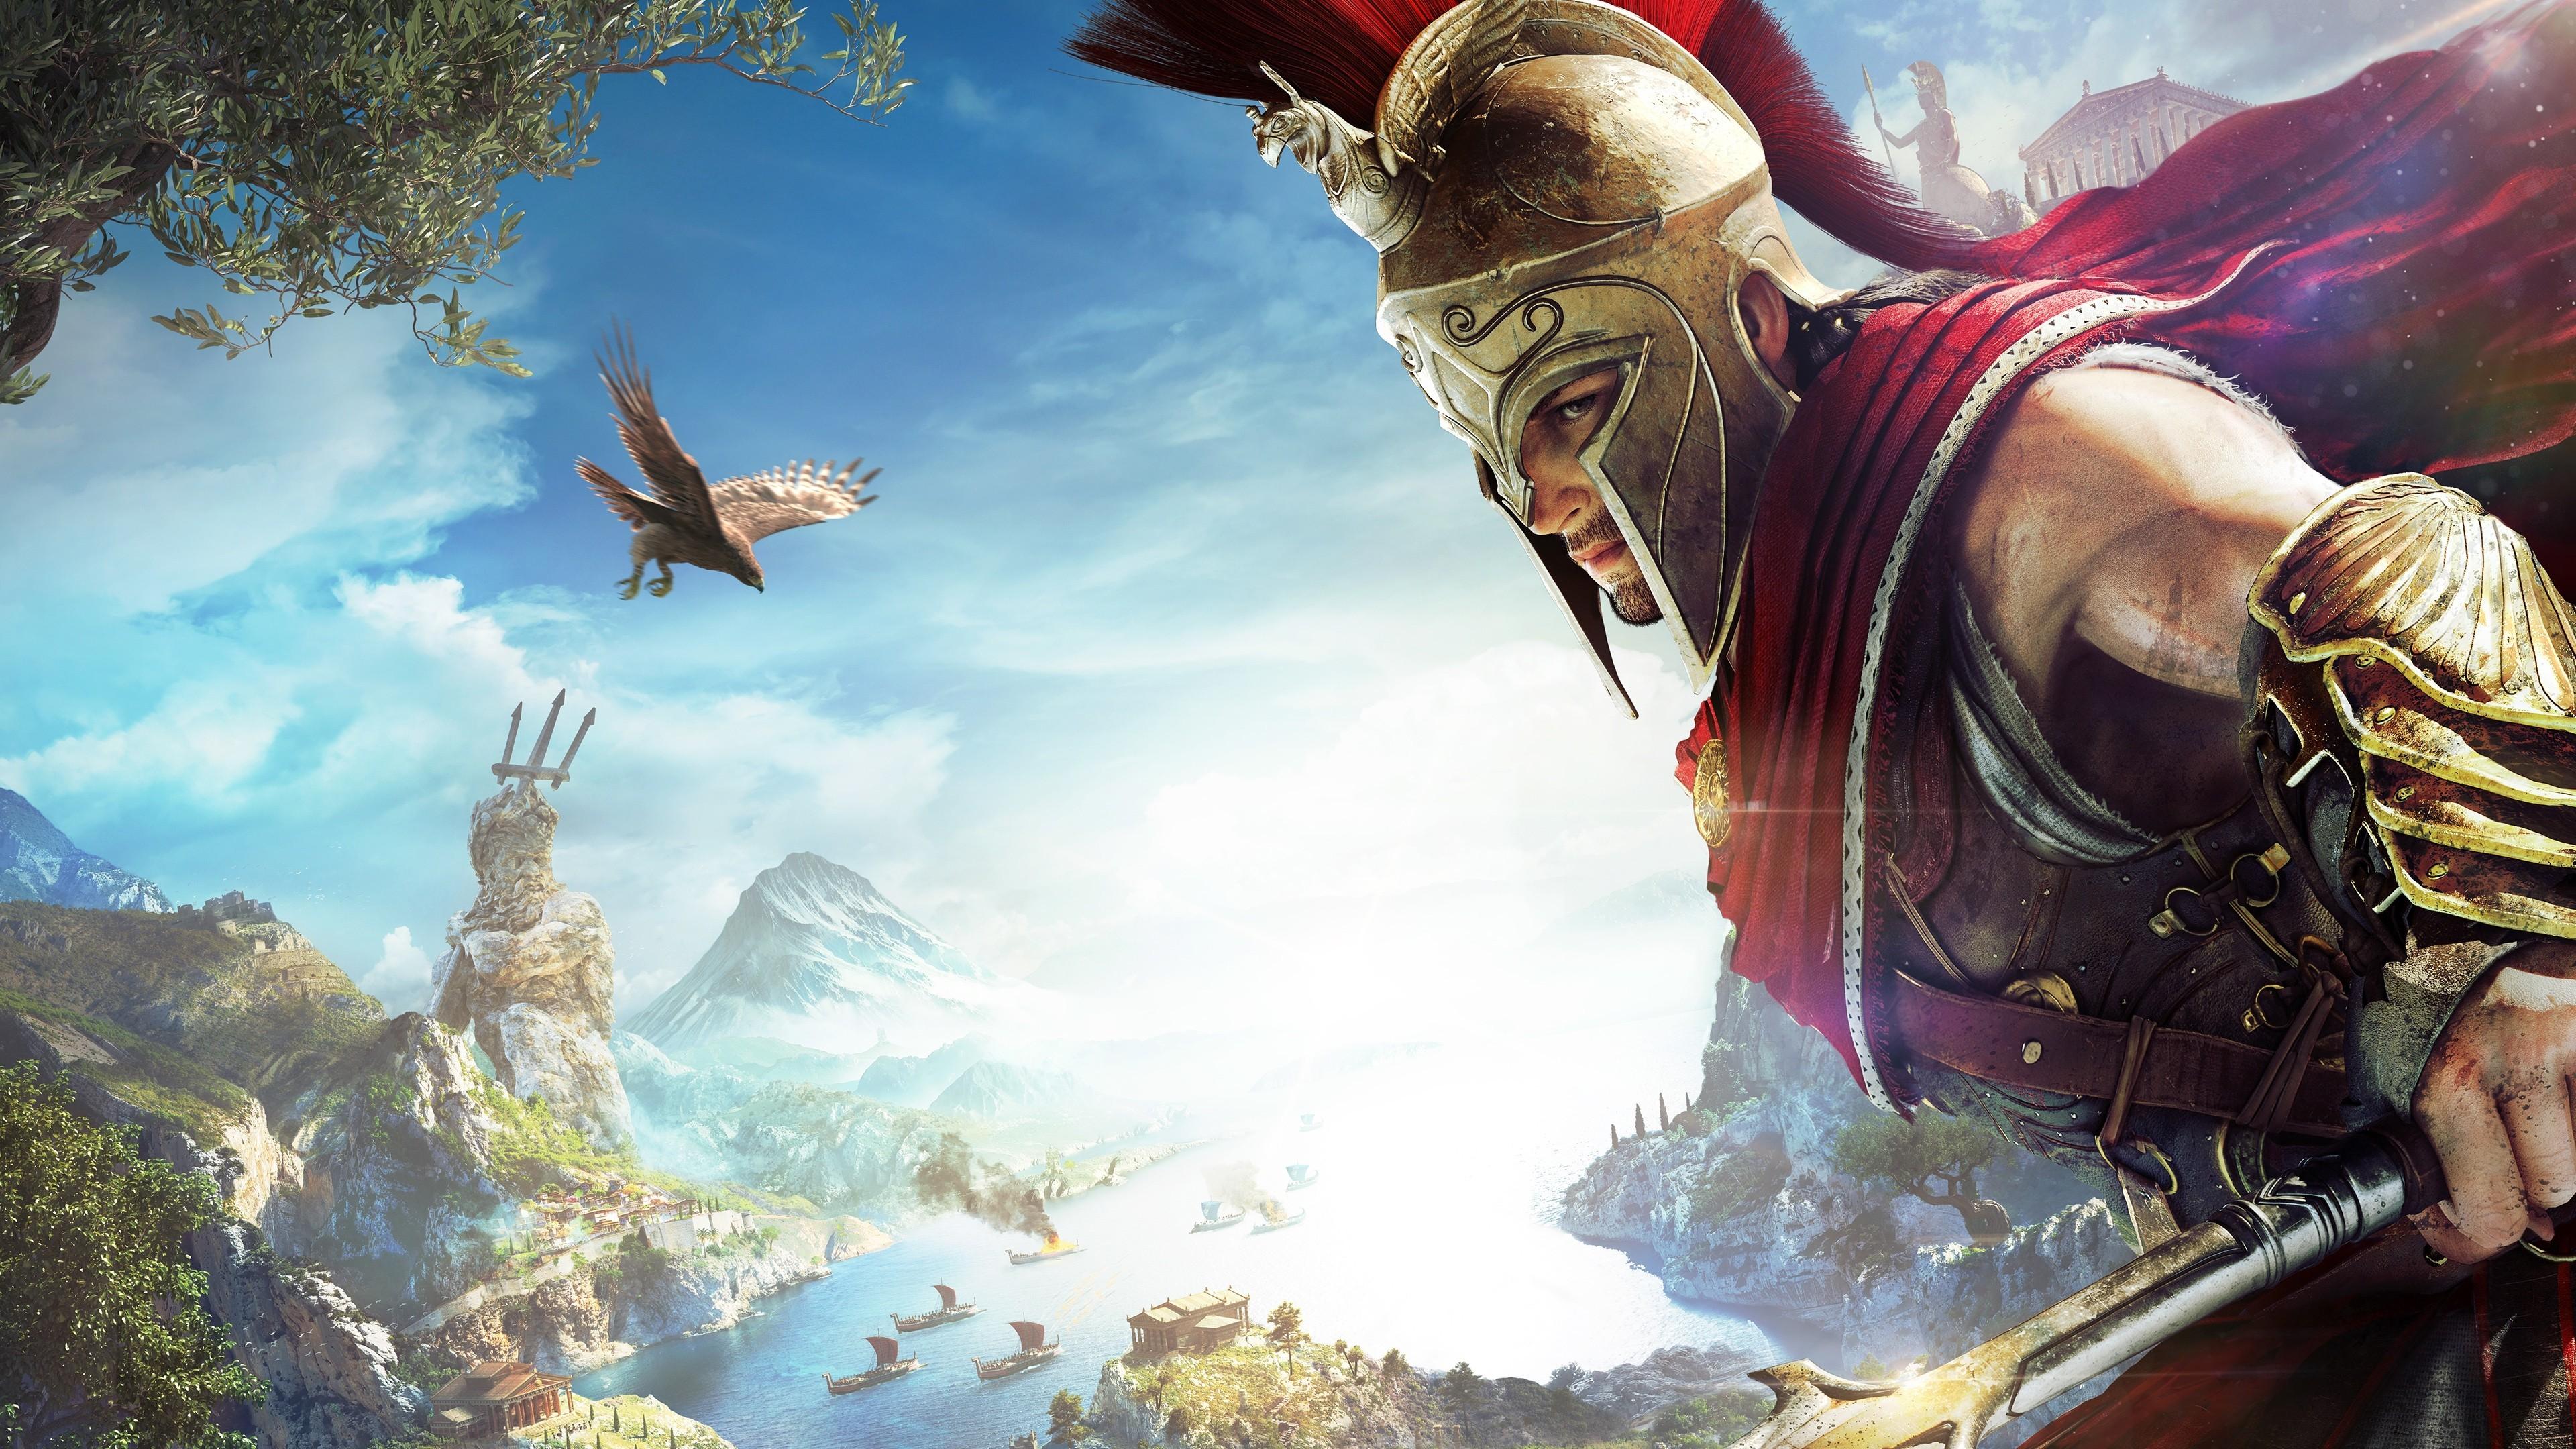 Download 3840x2160 Alexios, Assassin's Creed Odyssey, Clouds